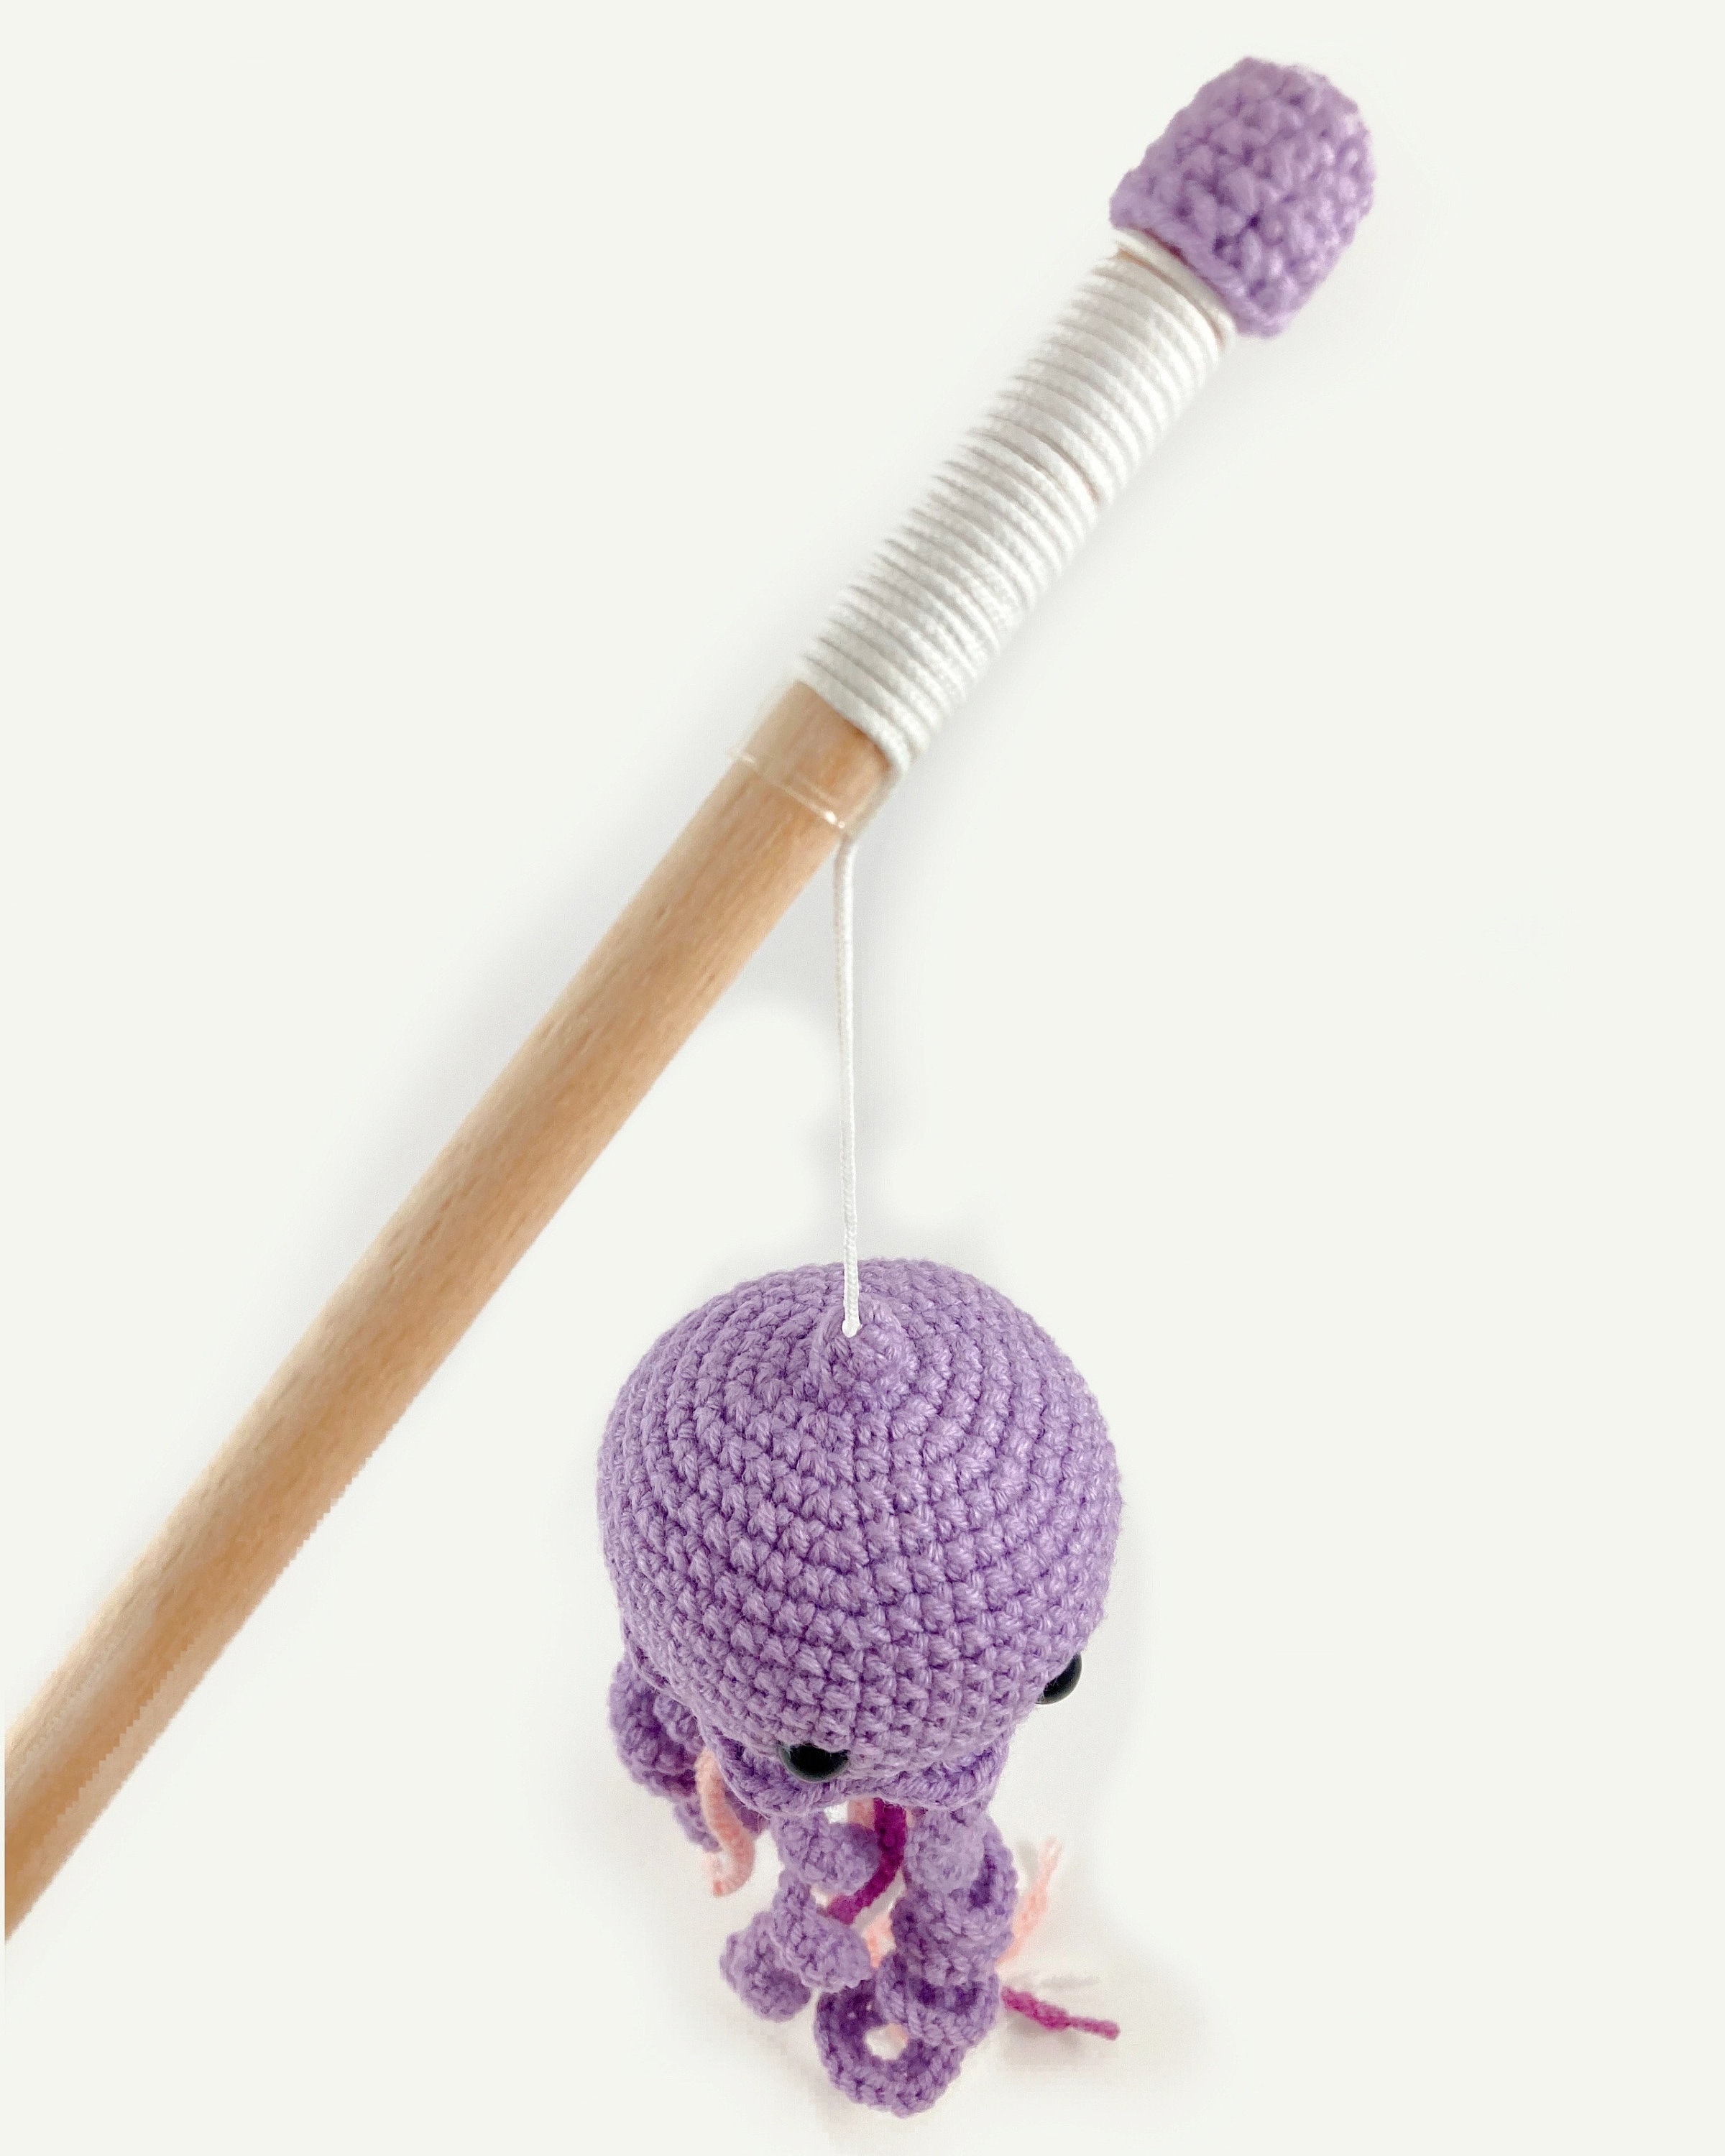 Personalized Fishing Pole for Cat, String Cat Toy, Crochet Gift for